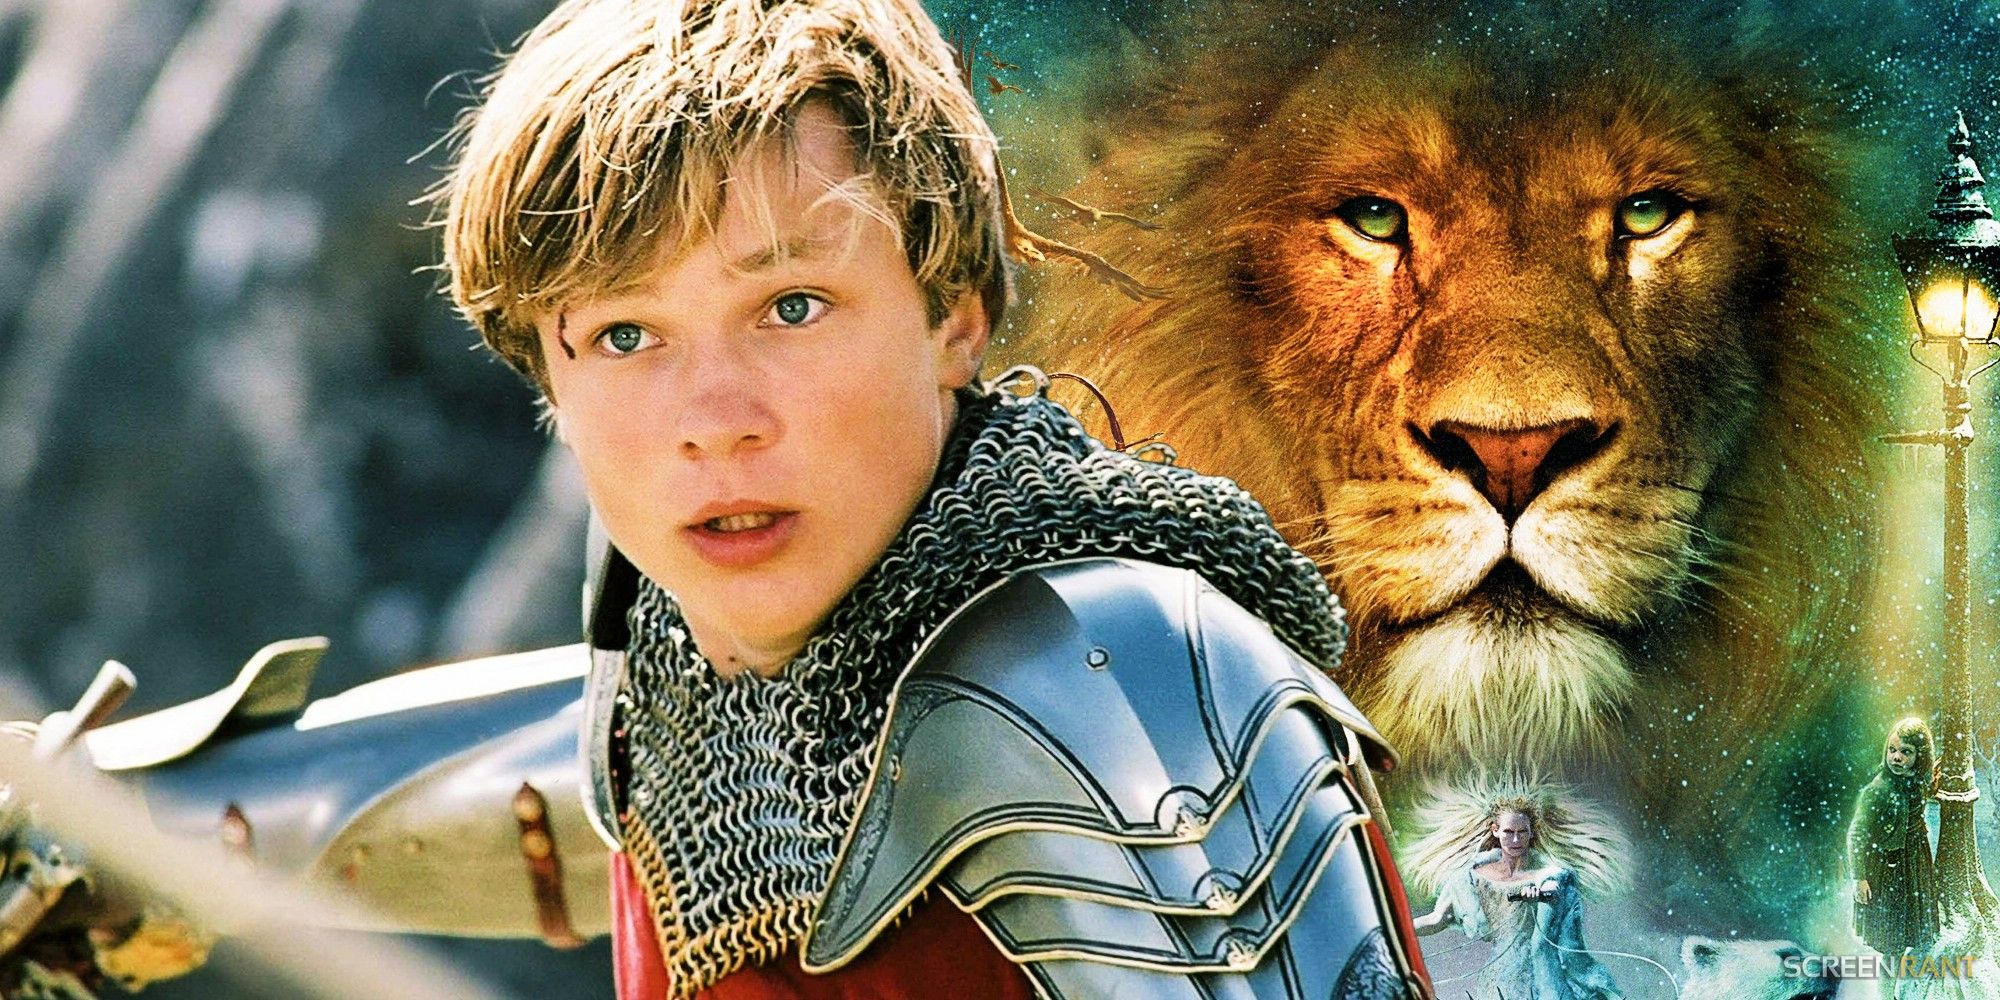 Peter Pevensie with a sword and Aslan in The Chronicles of Narnia: The Lion, the Witch and the Wardrobe